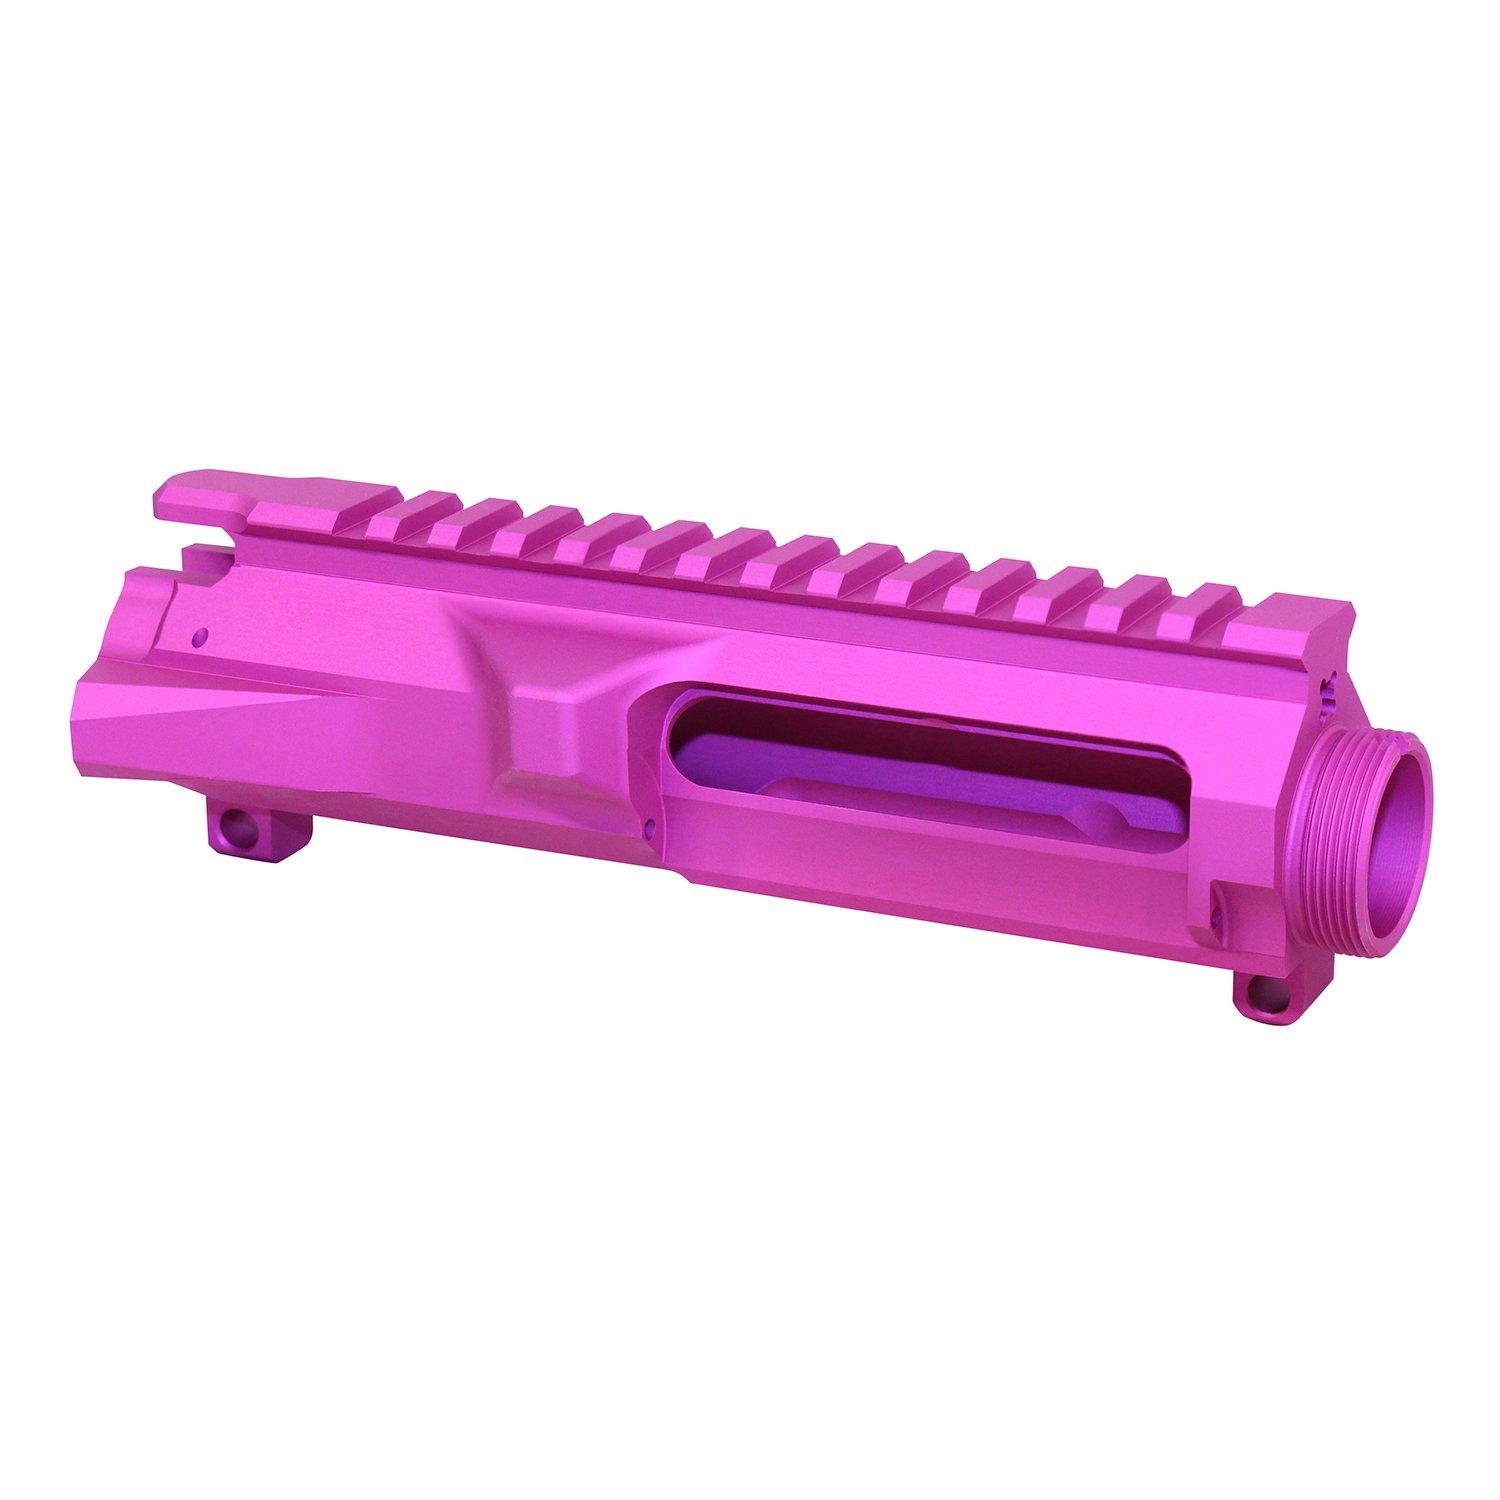 Vibrant pink AR-15 stripped billet upper receiver with picatinny rail.